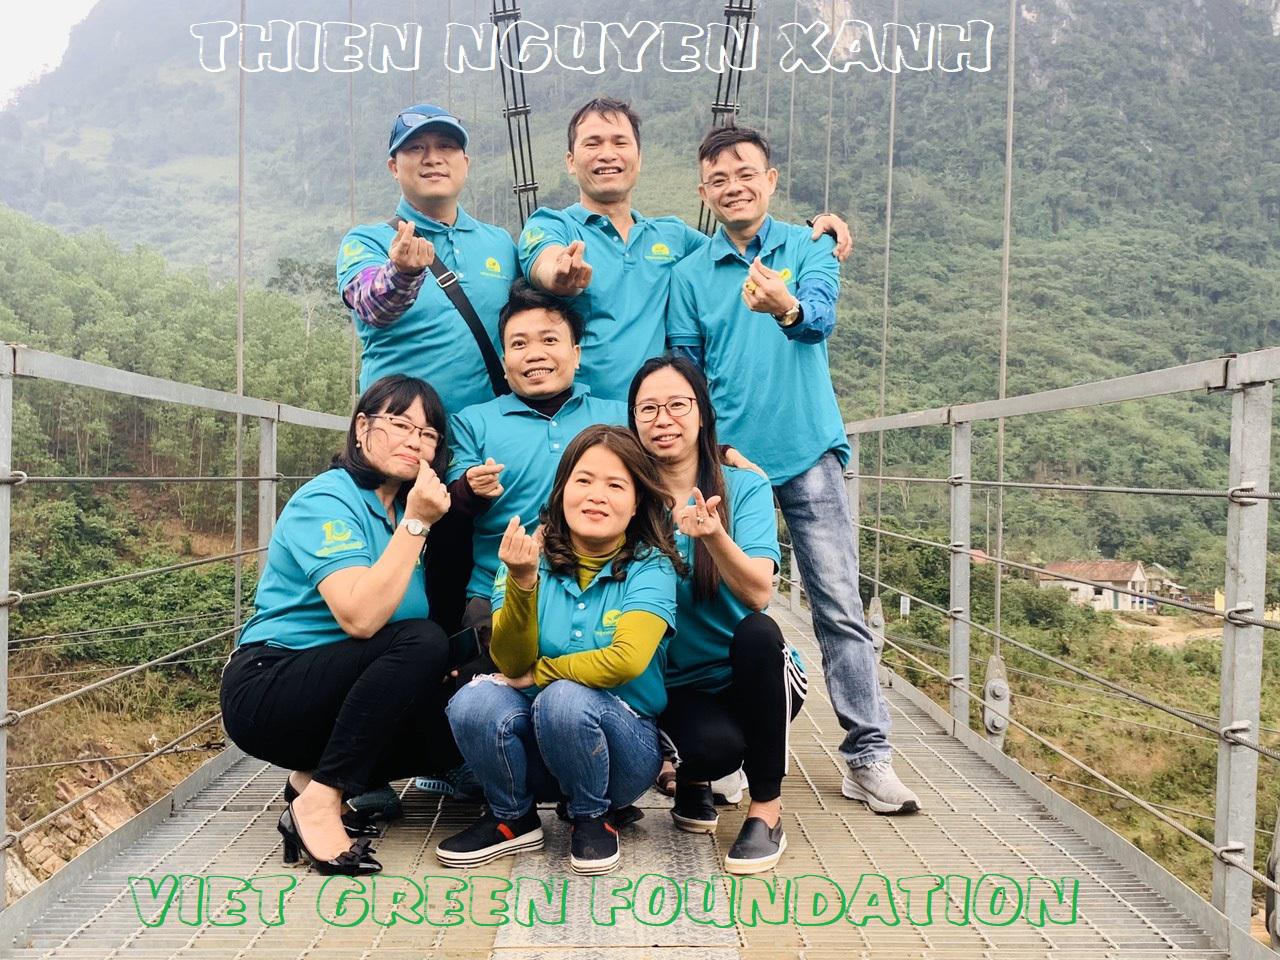 Viet Green Foundation: Vision and Mission for Vietnam